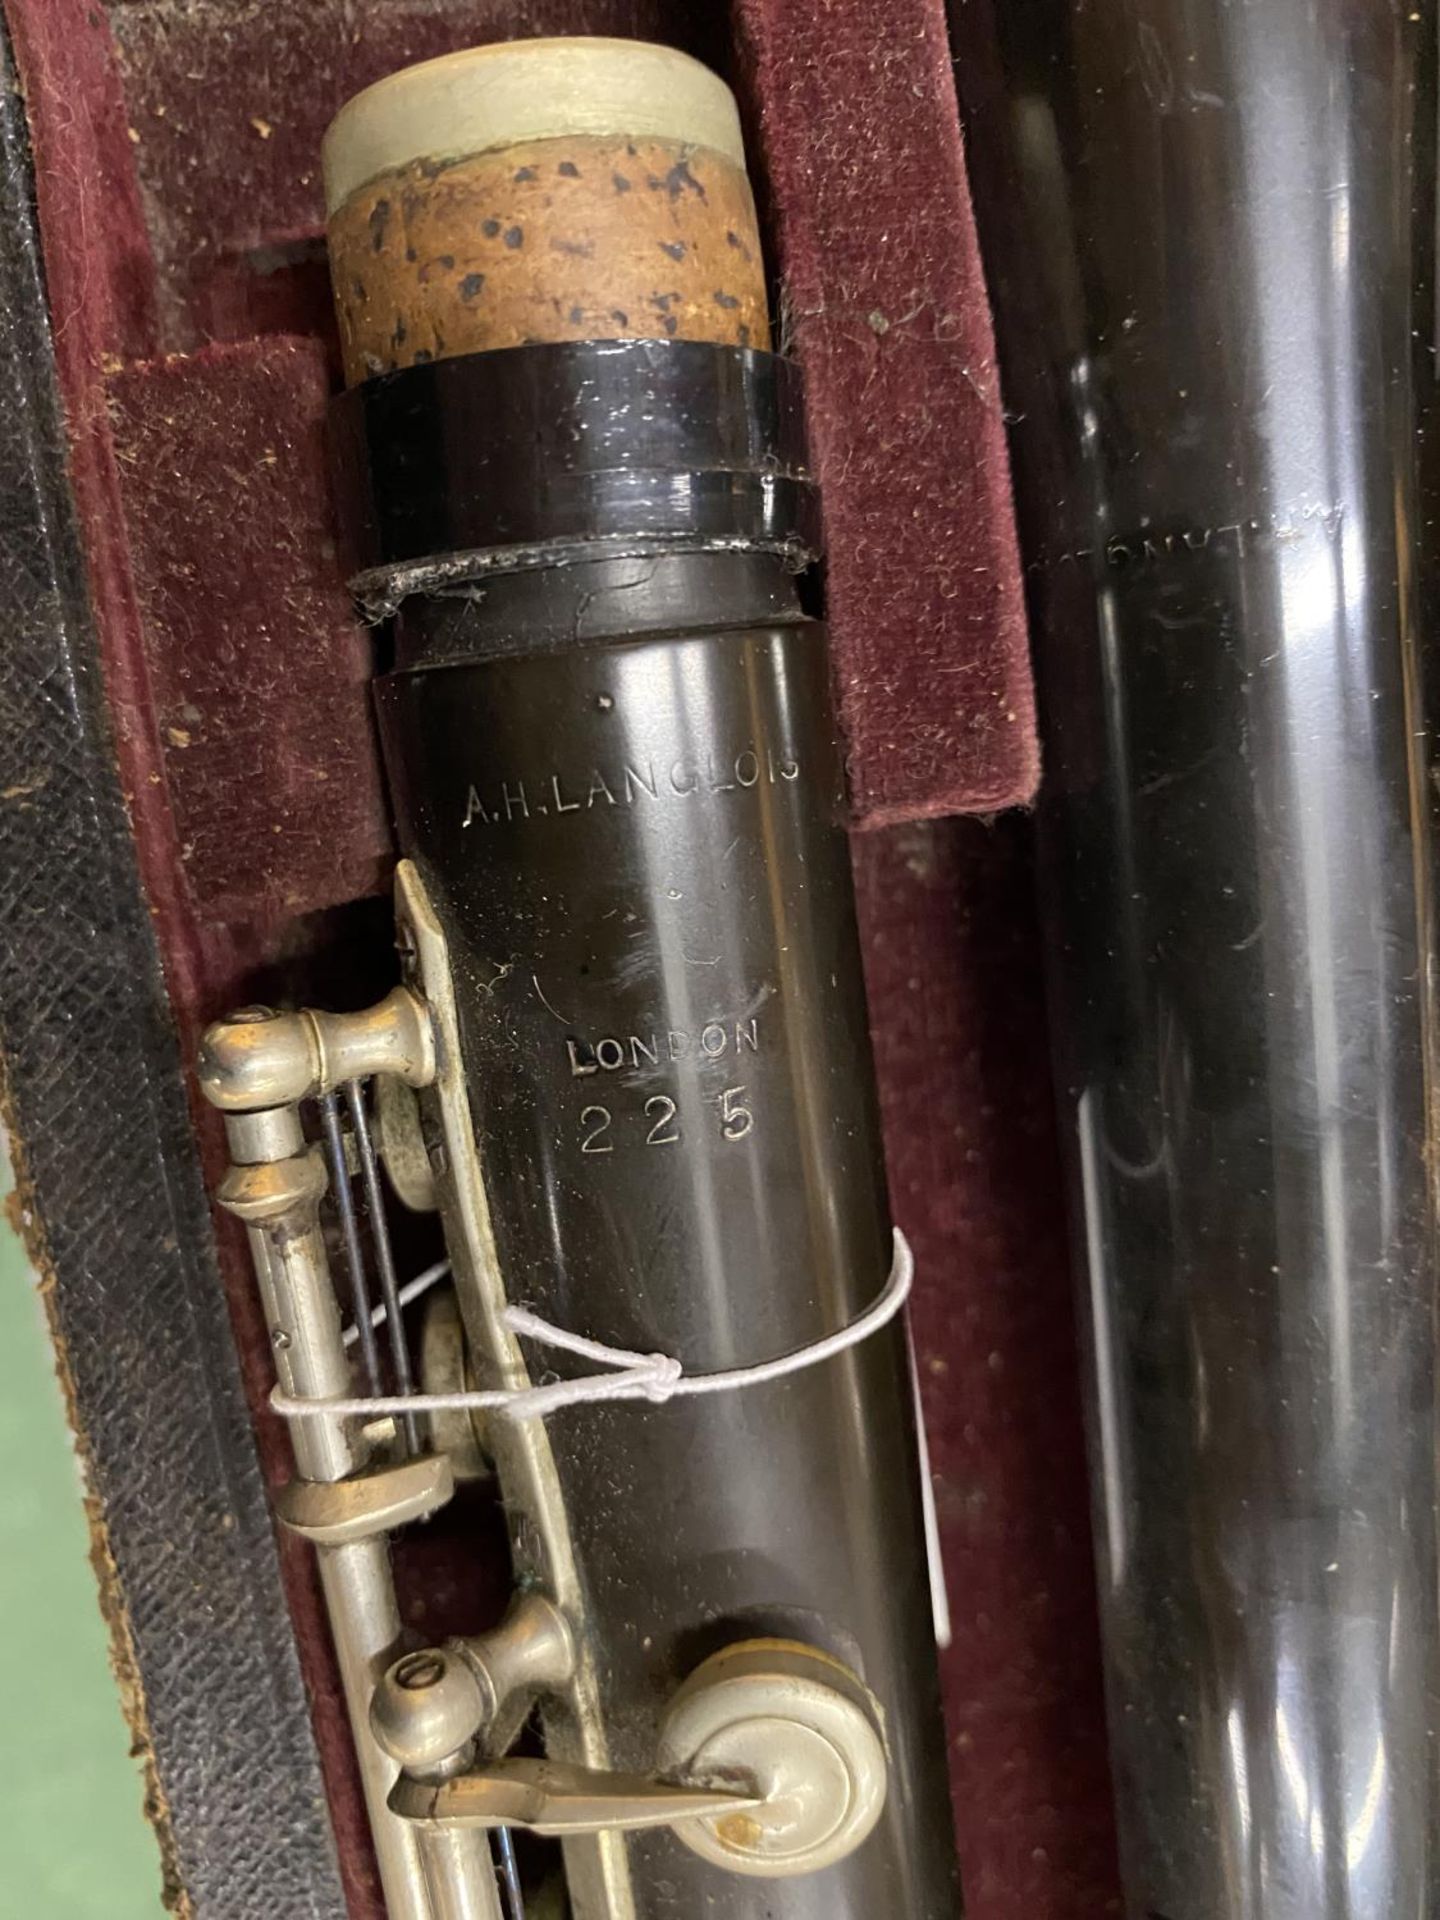 A VINTAGE CASED A.H LANGLOIS, LONDON CLARINET - Image 2 of 2